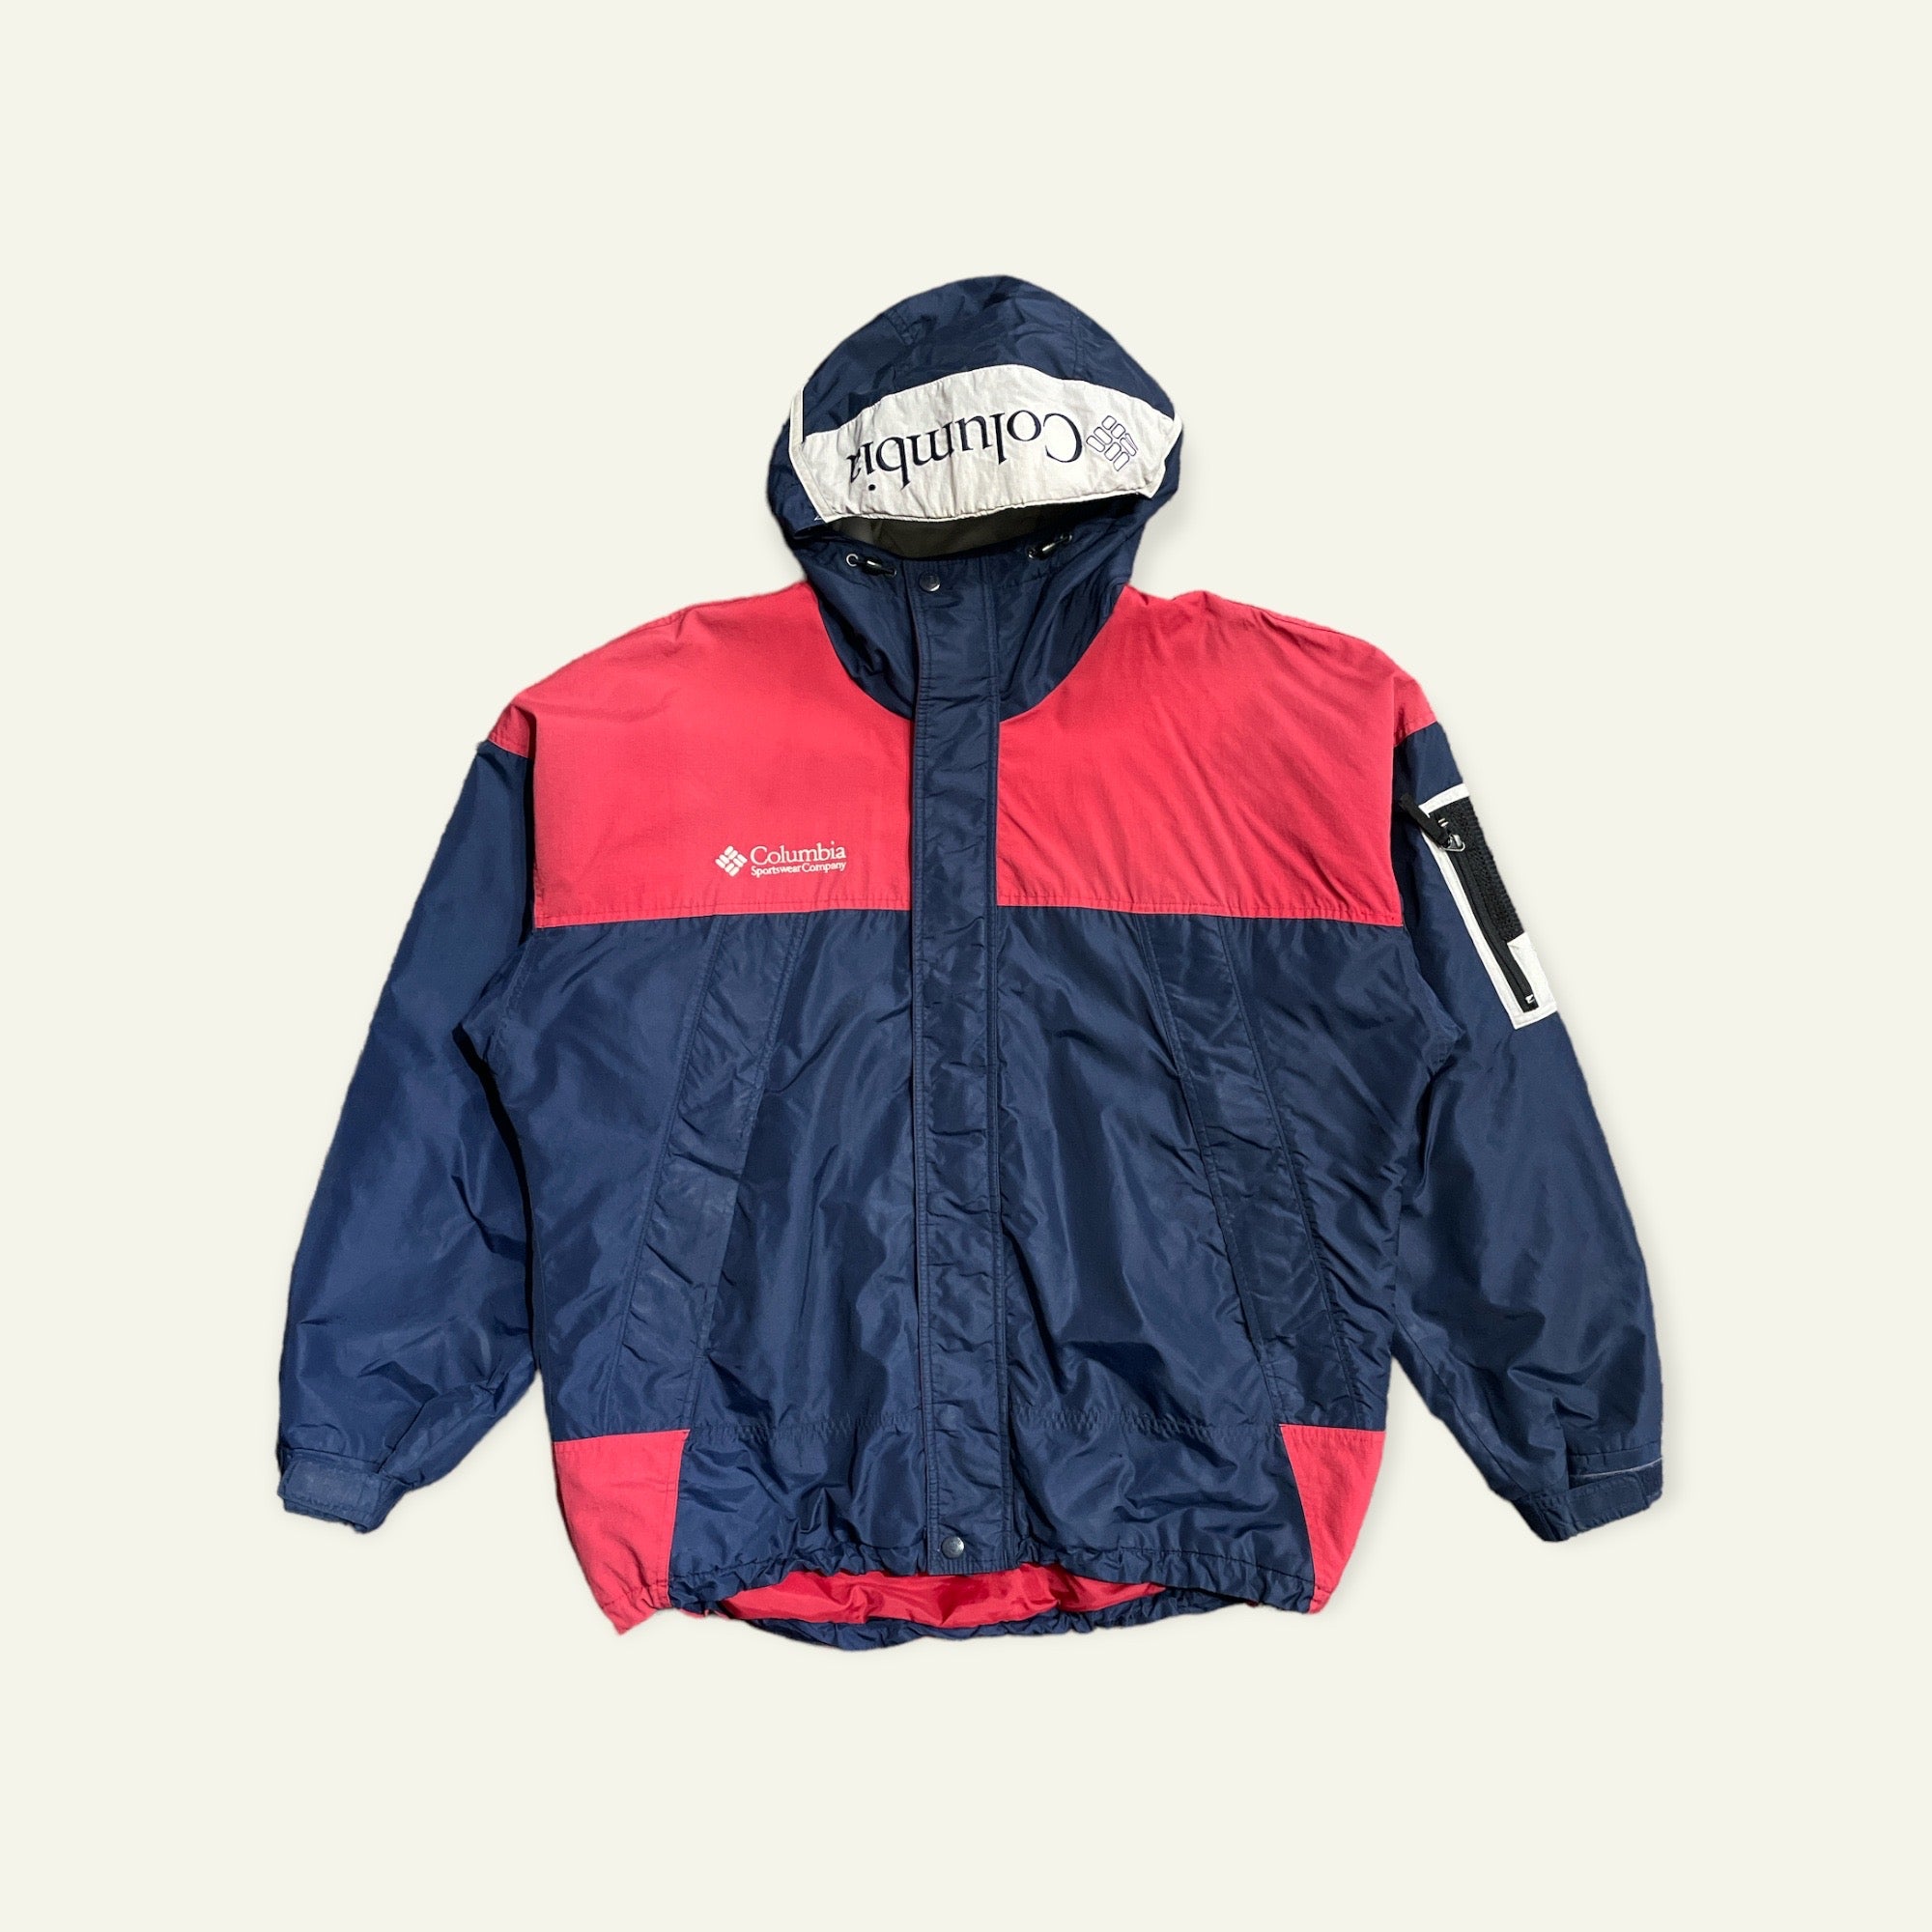 Vintage Columbia Jacket Red Size XL